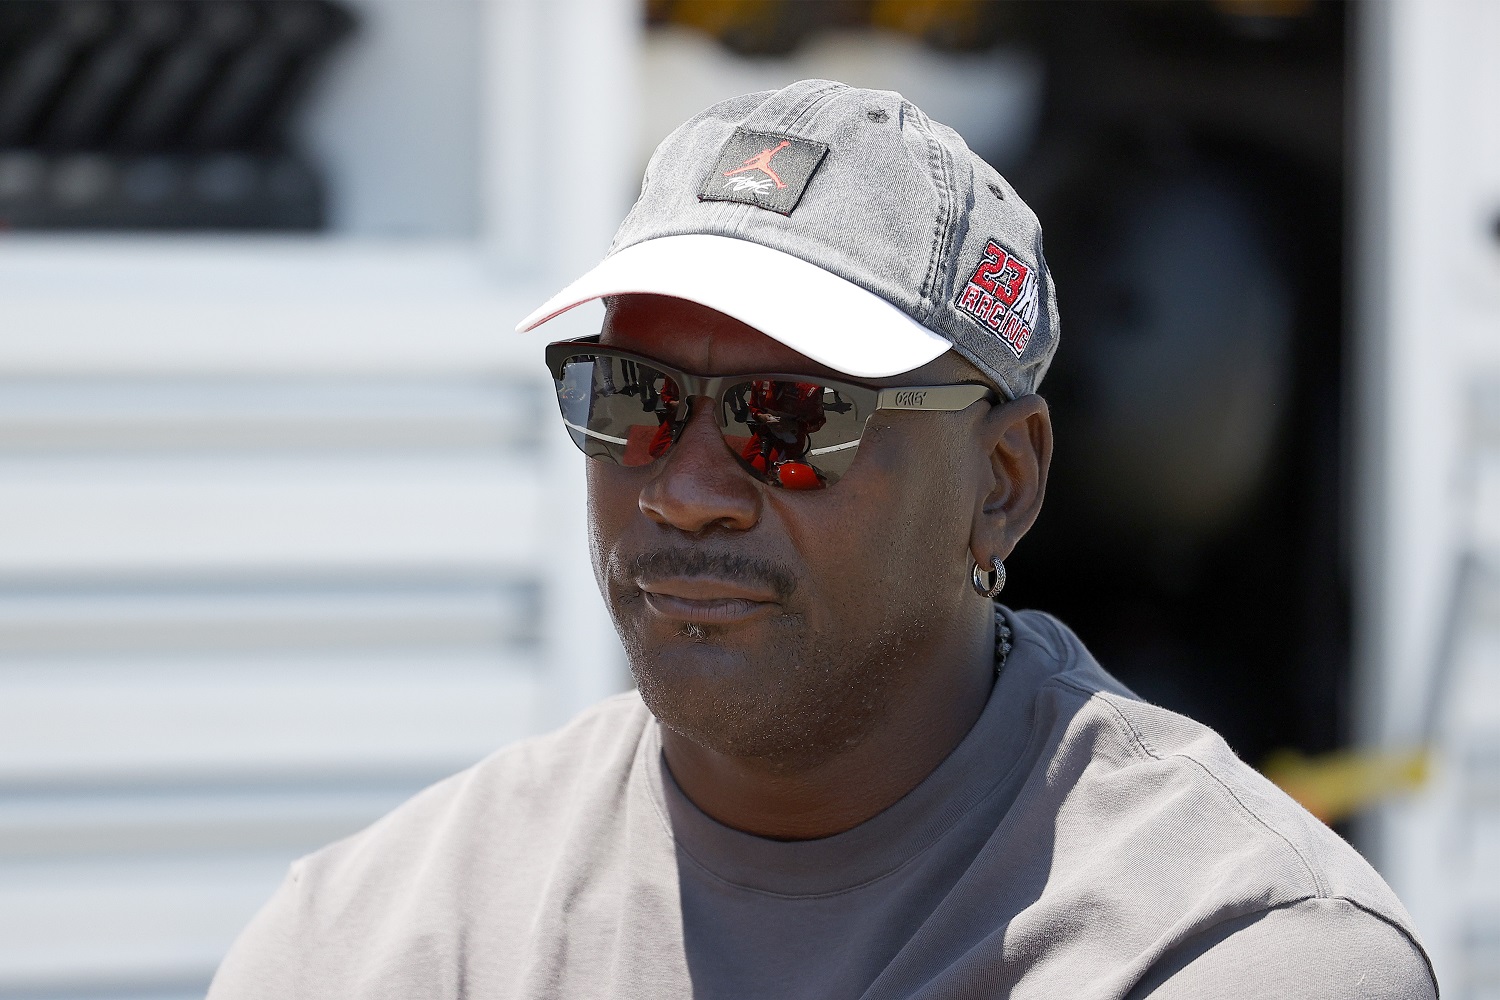 Michael Jordan Has Been Dunked on by a New NASCAR Owner Who Sells